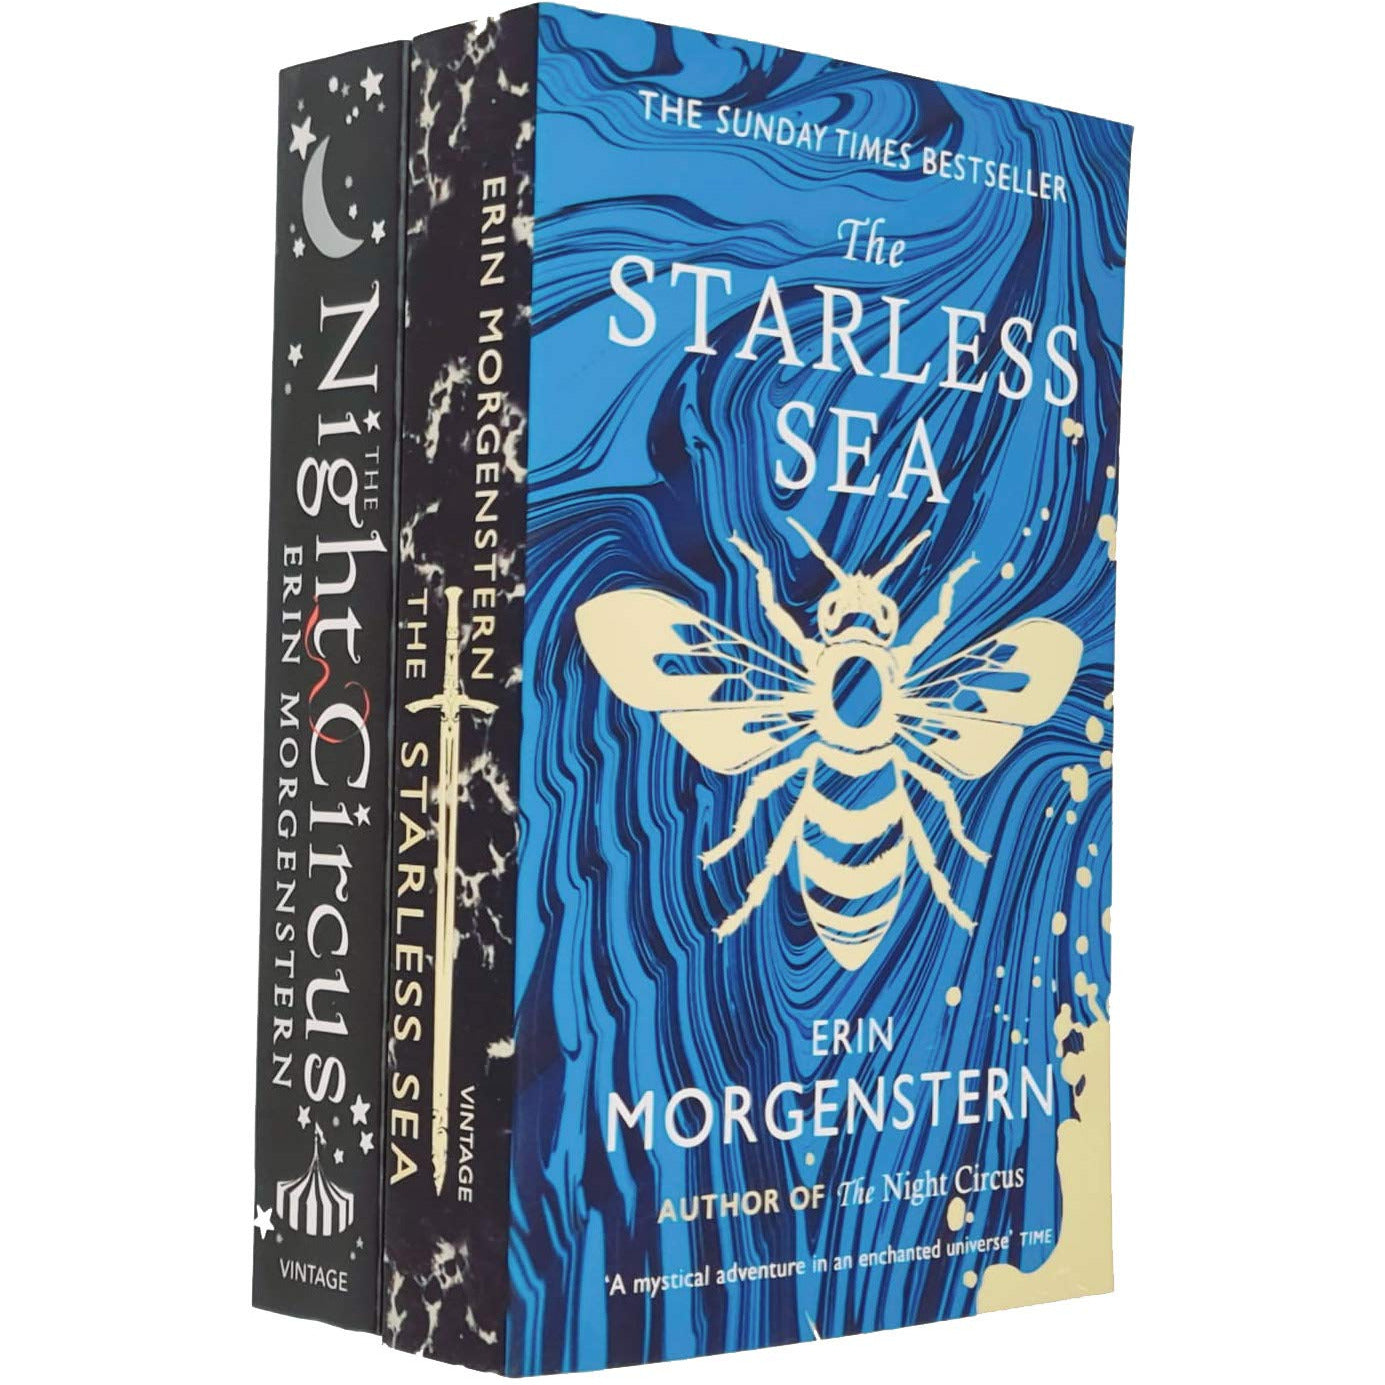 Set　Sea,　Morgenstern　Erin　Circus)　The　Collection　Books　Starless　(The　Night